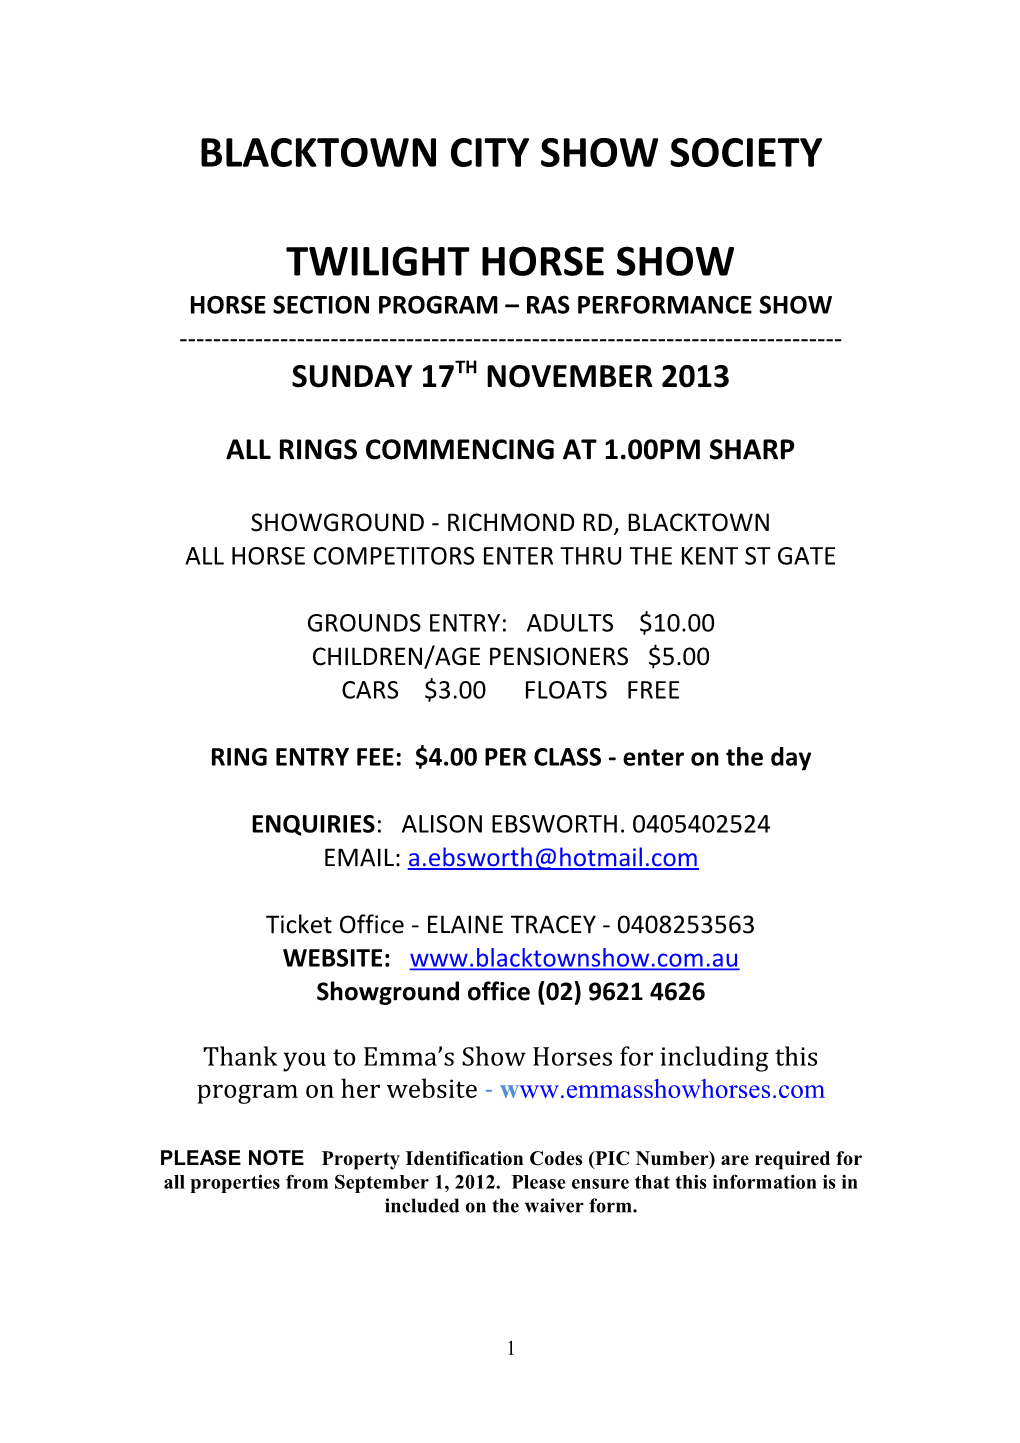 St Ives Twilight Horse Show 2013 Page 1